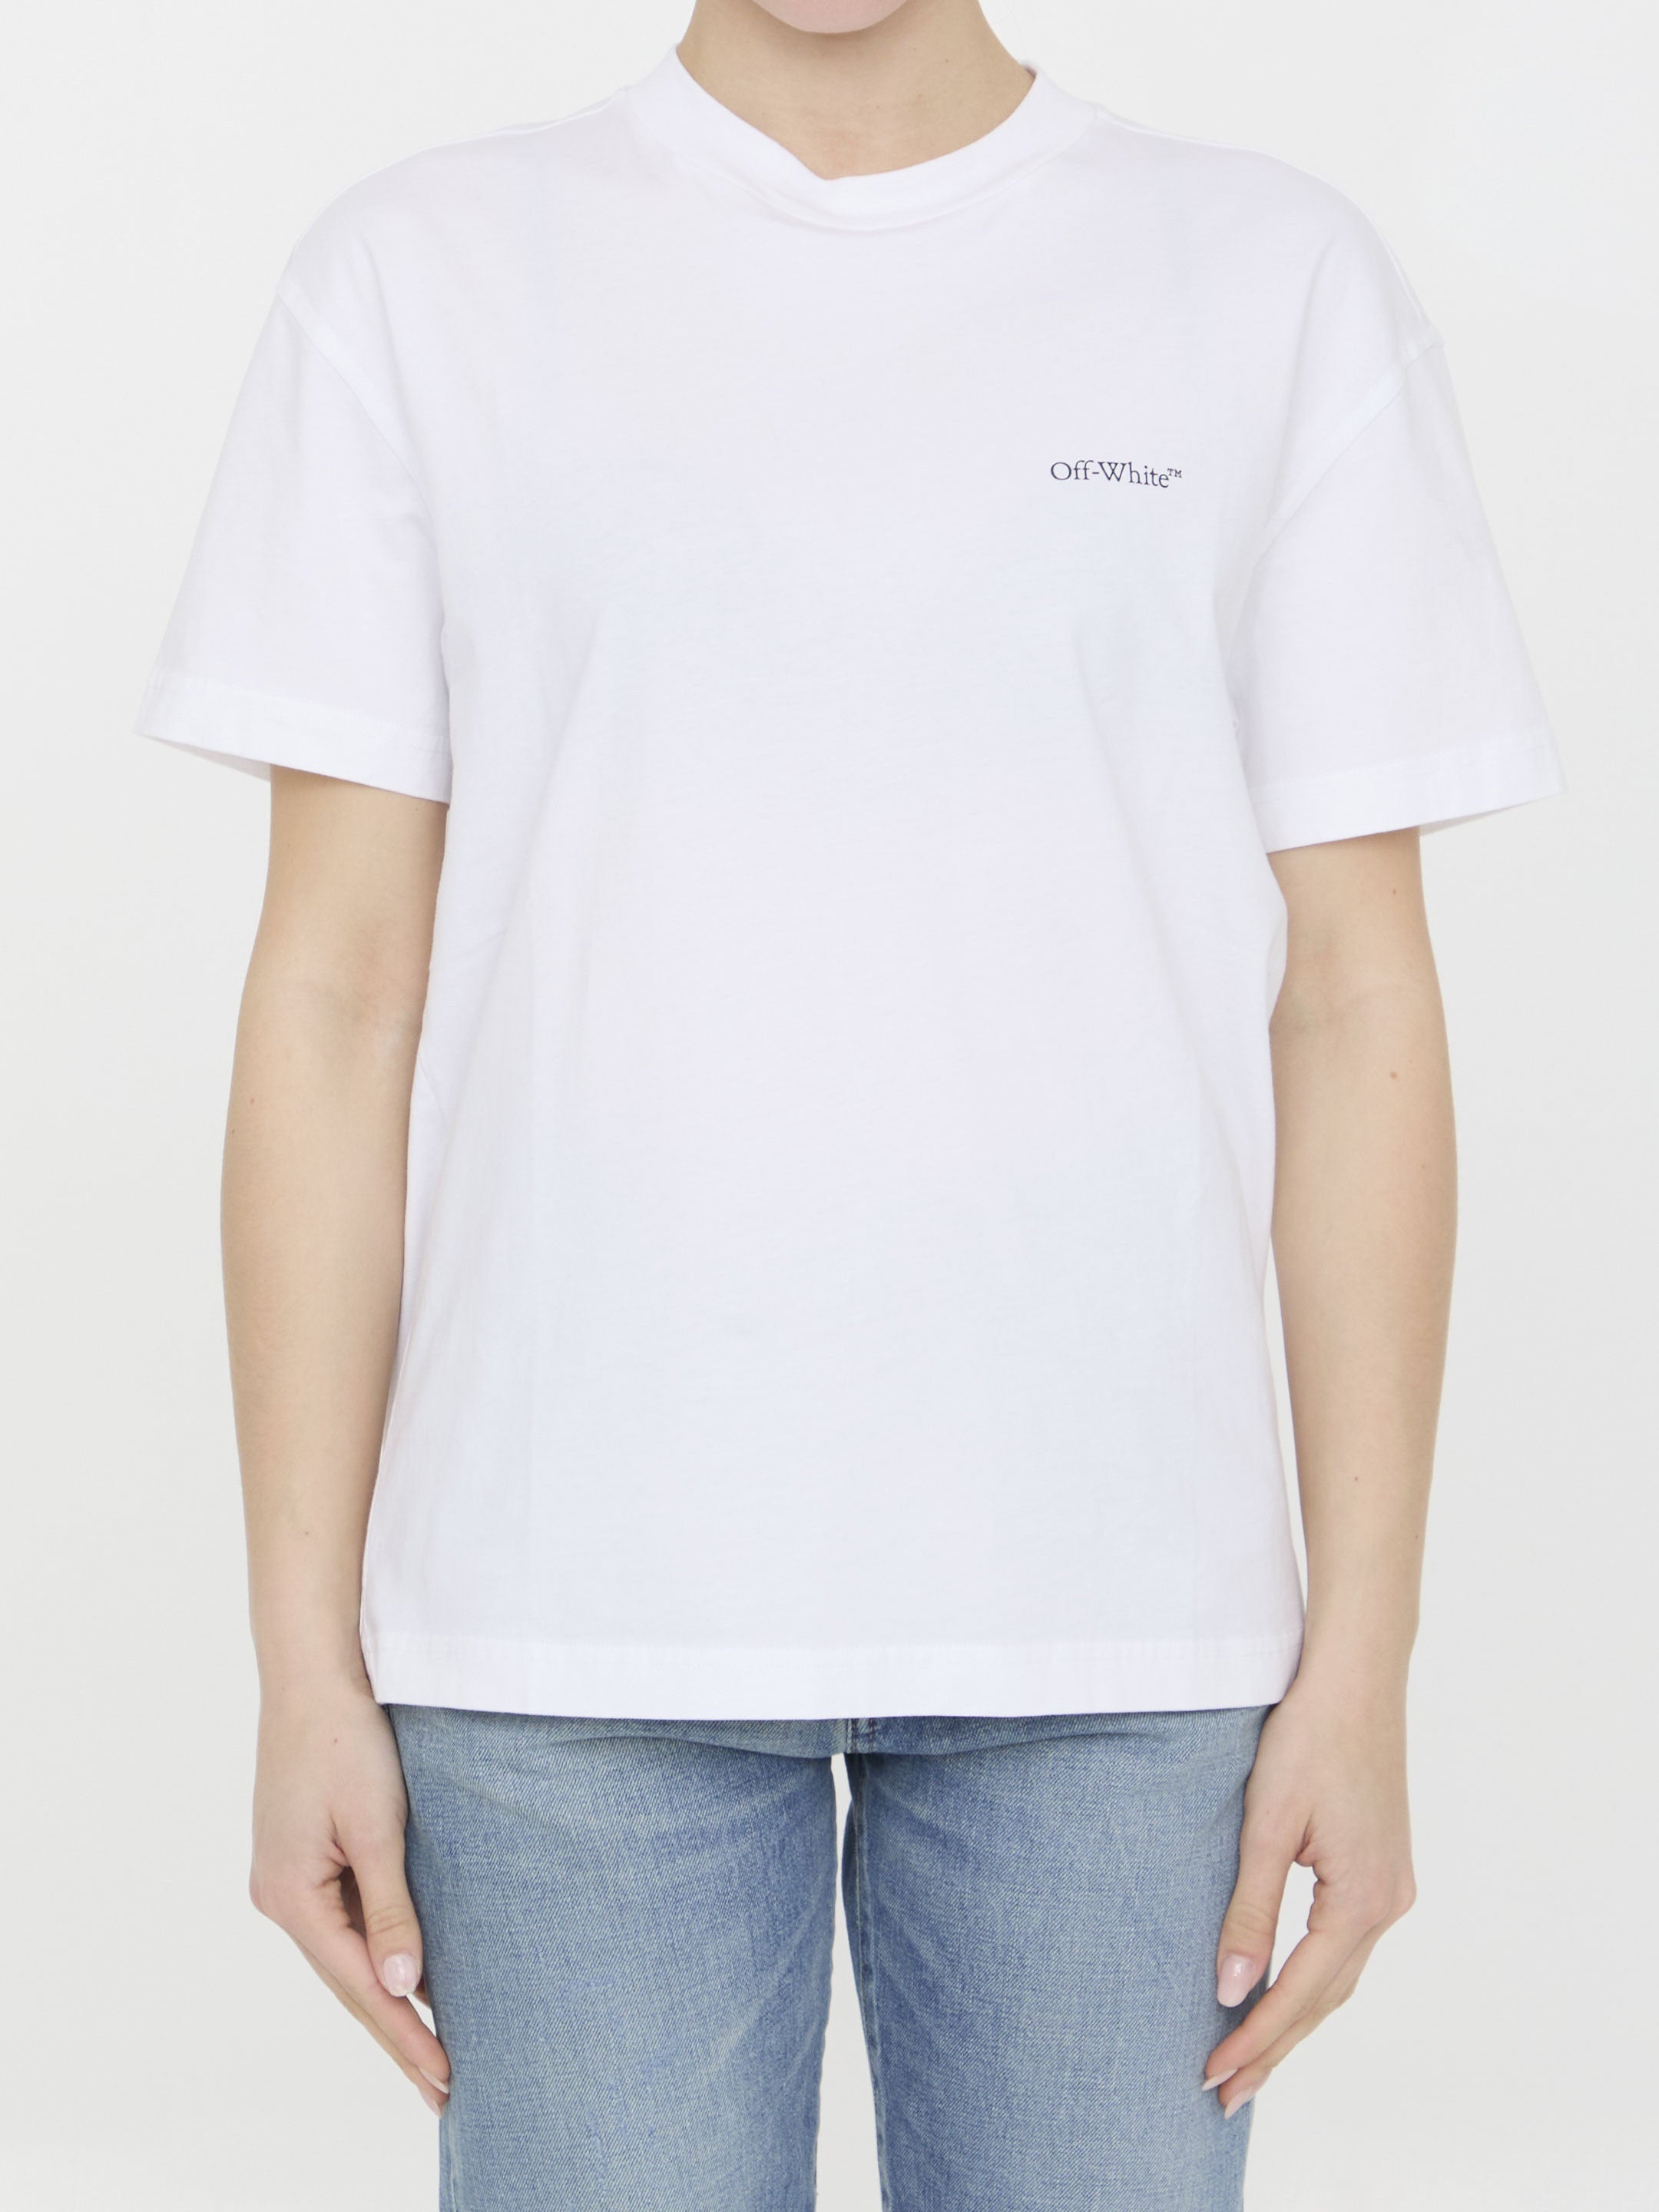 OFF-WHITE-OUTLET-SALE-Arrow-X-Ray-motif-t-shirt-Shirts-S-WHITE-ARCHIVE-COLLECTION.jpg